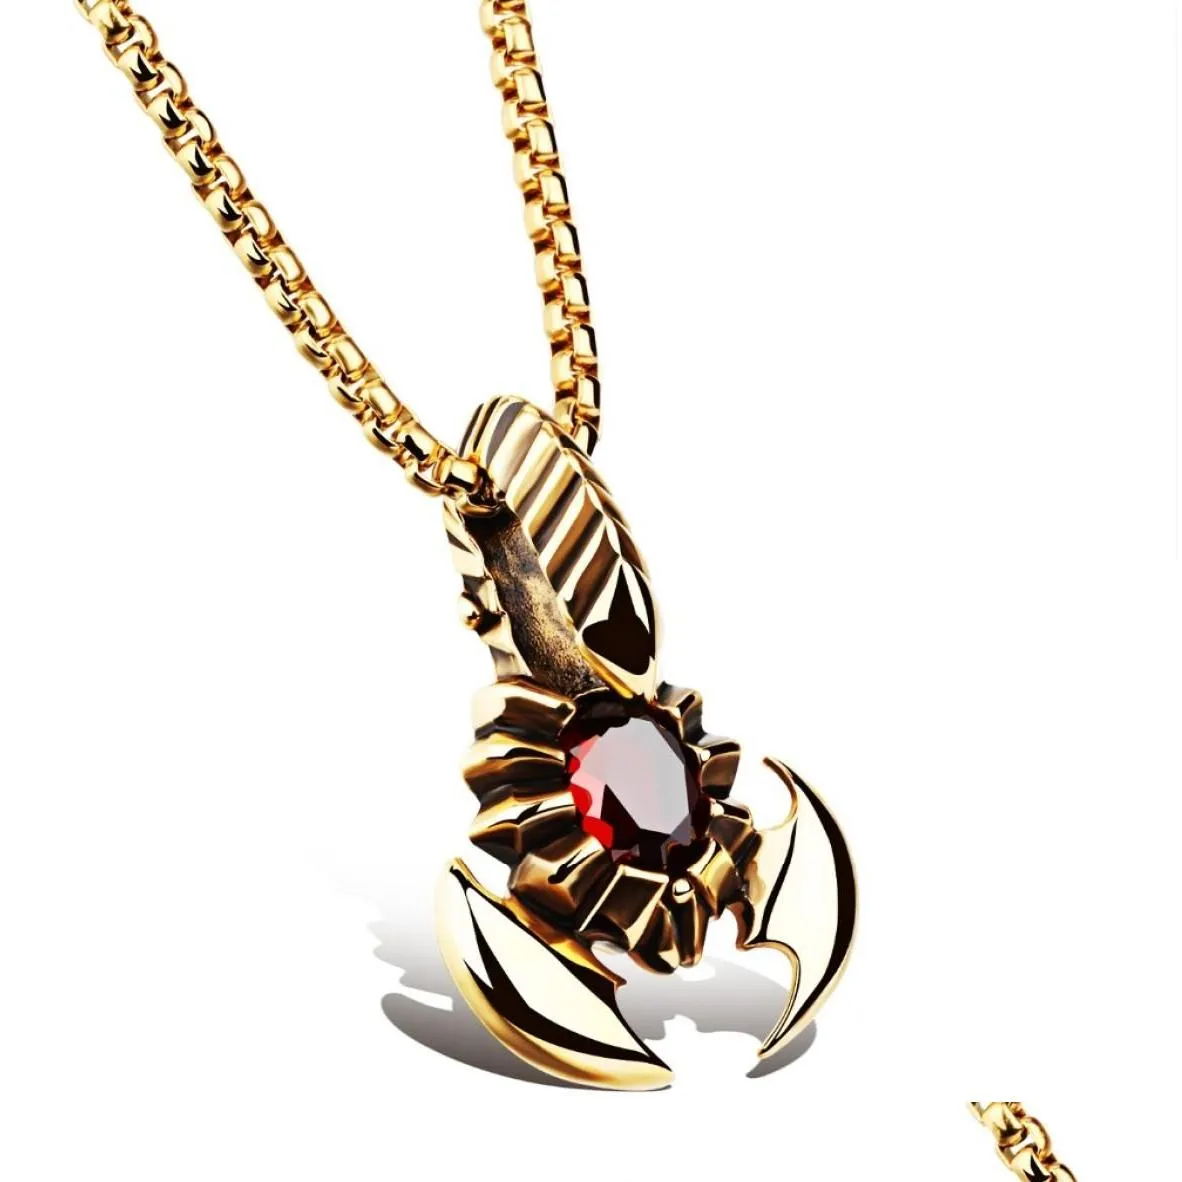 Pendant Necklaces Fashion Jewelry Stainless Steel Men Necklace Scorpion With Stone Golden Sier Pendant High Quality Necklaces For Men5 Dhaud